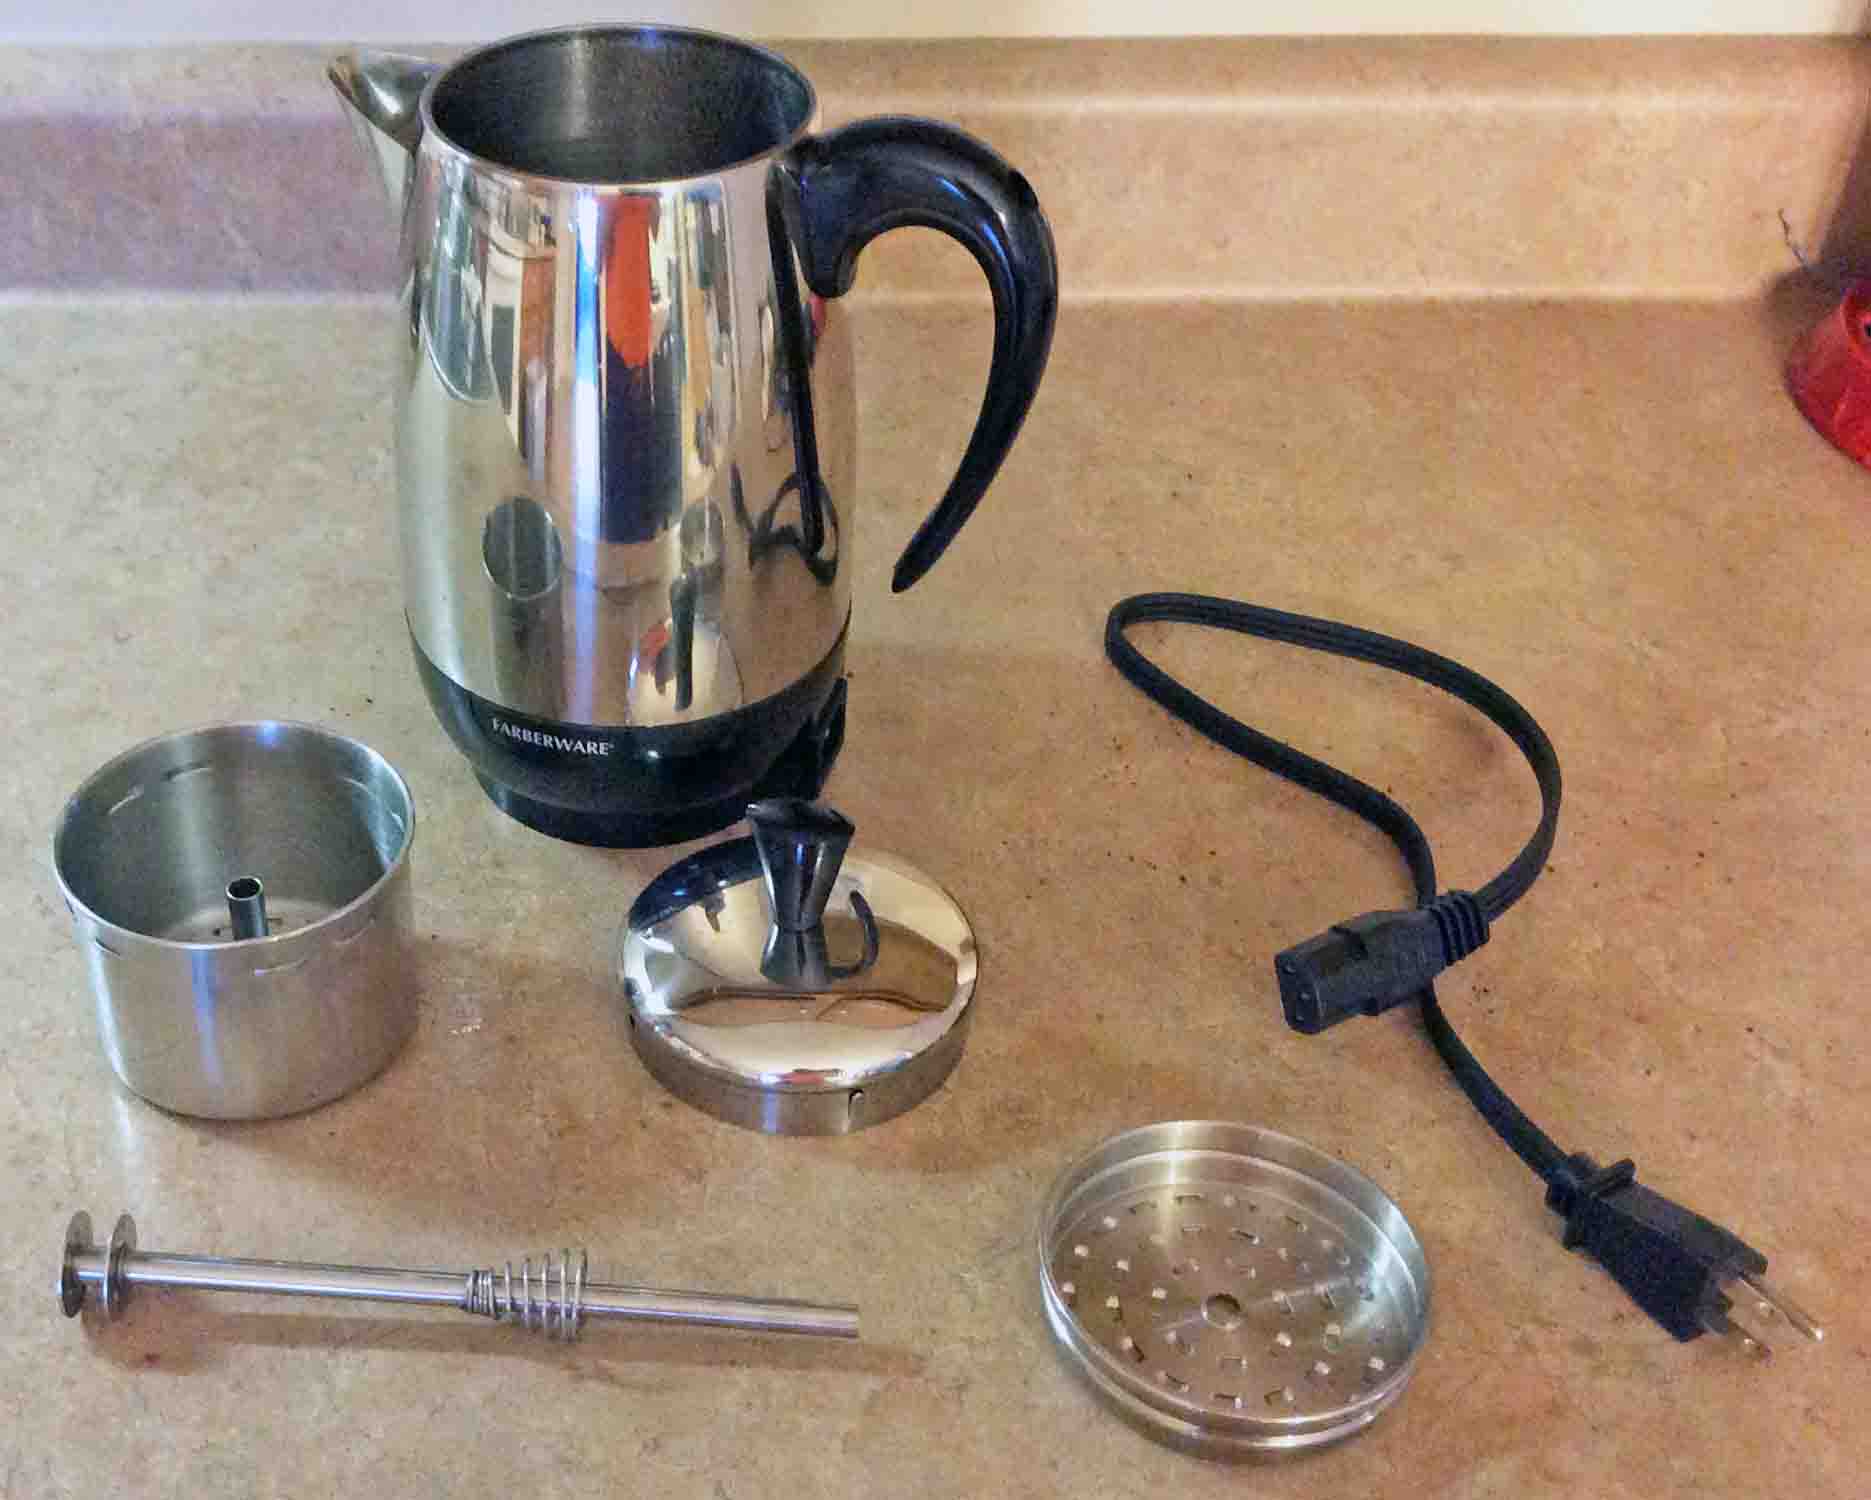 Farberware FCP240 Electric Percolator: Traditional Coffee Making at Its  Best!